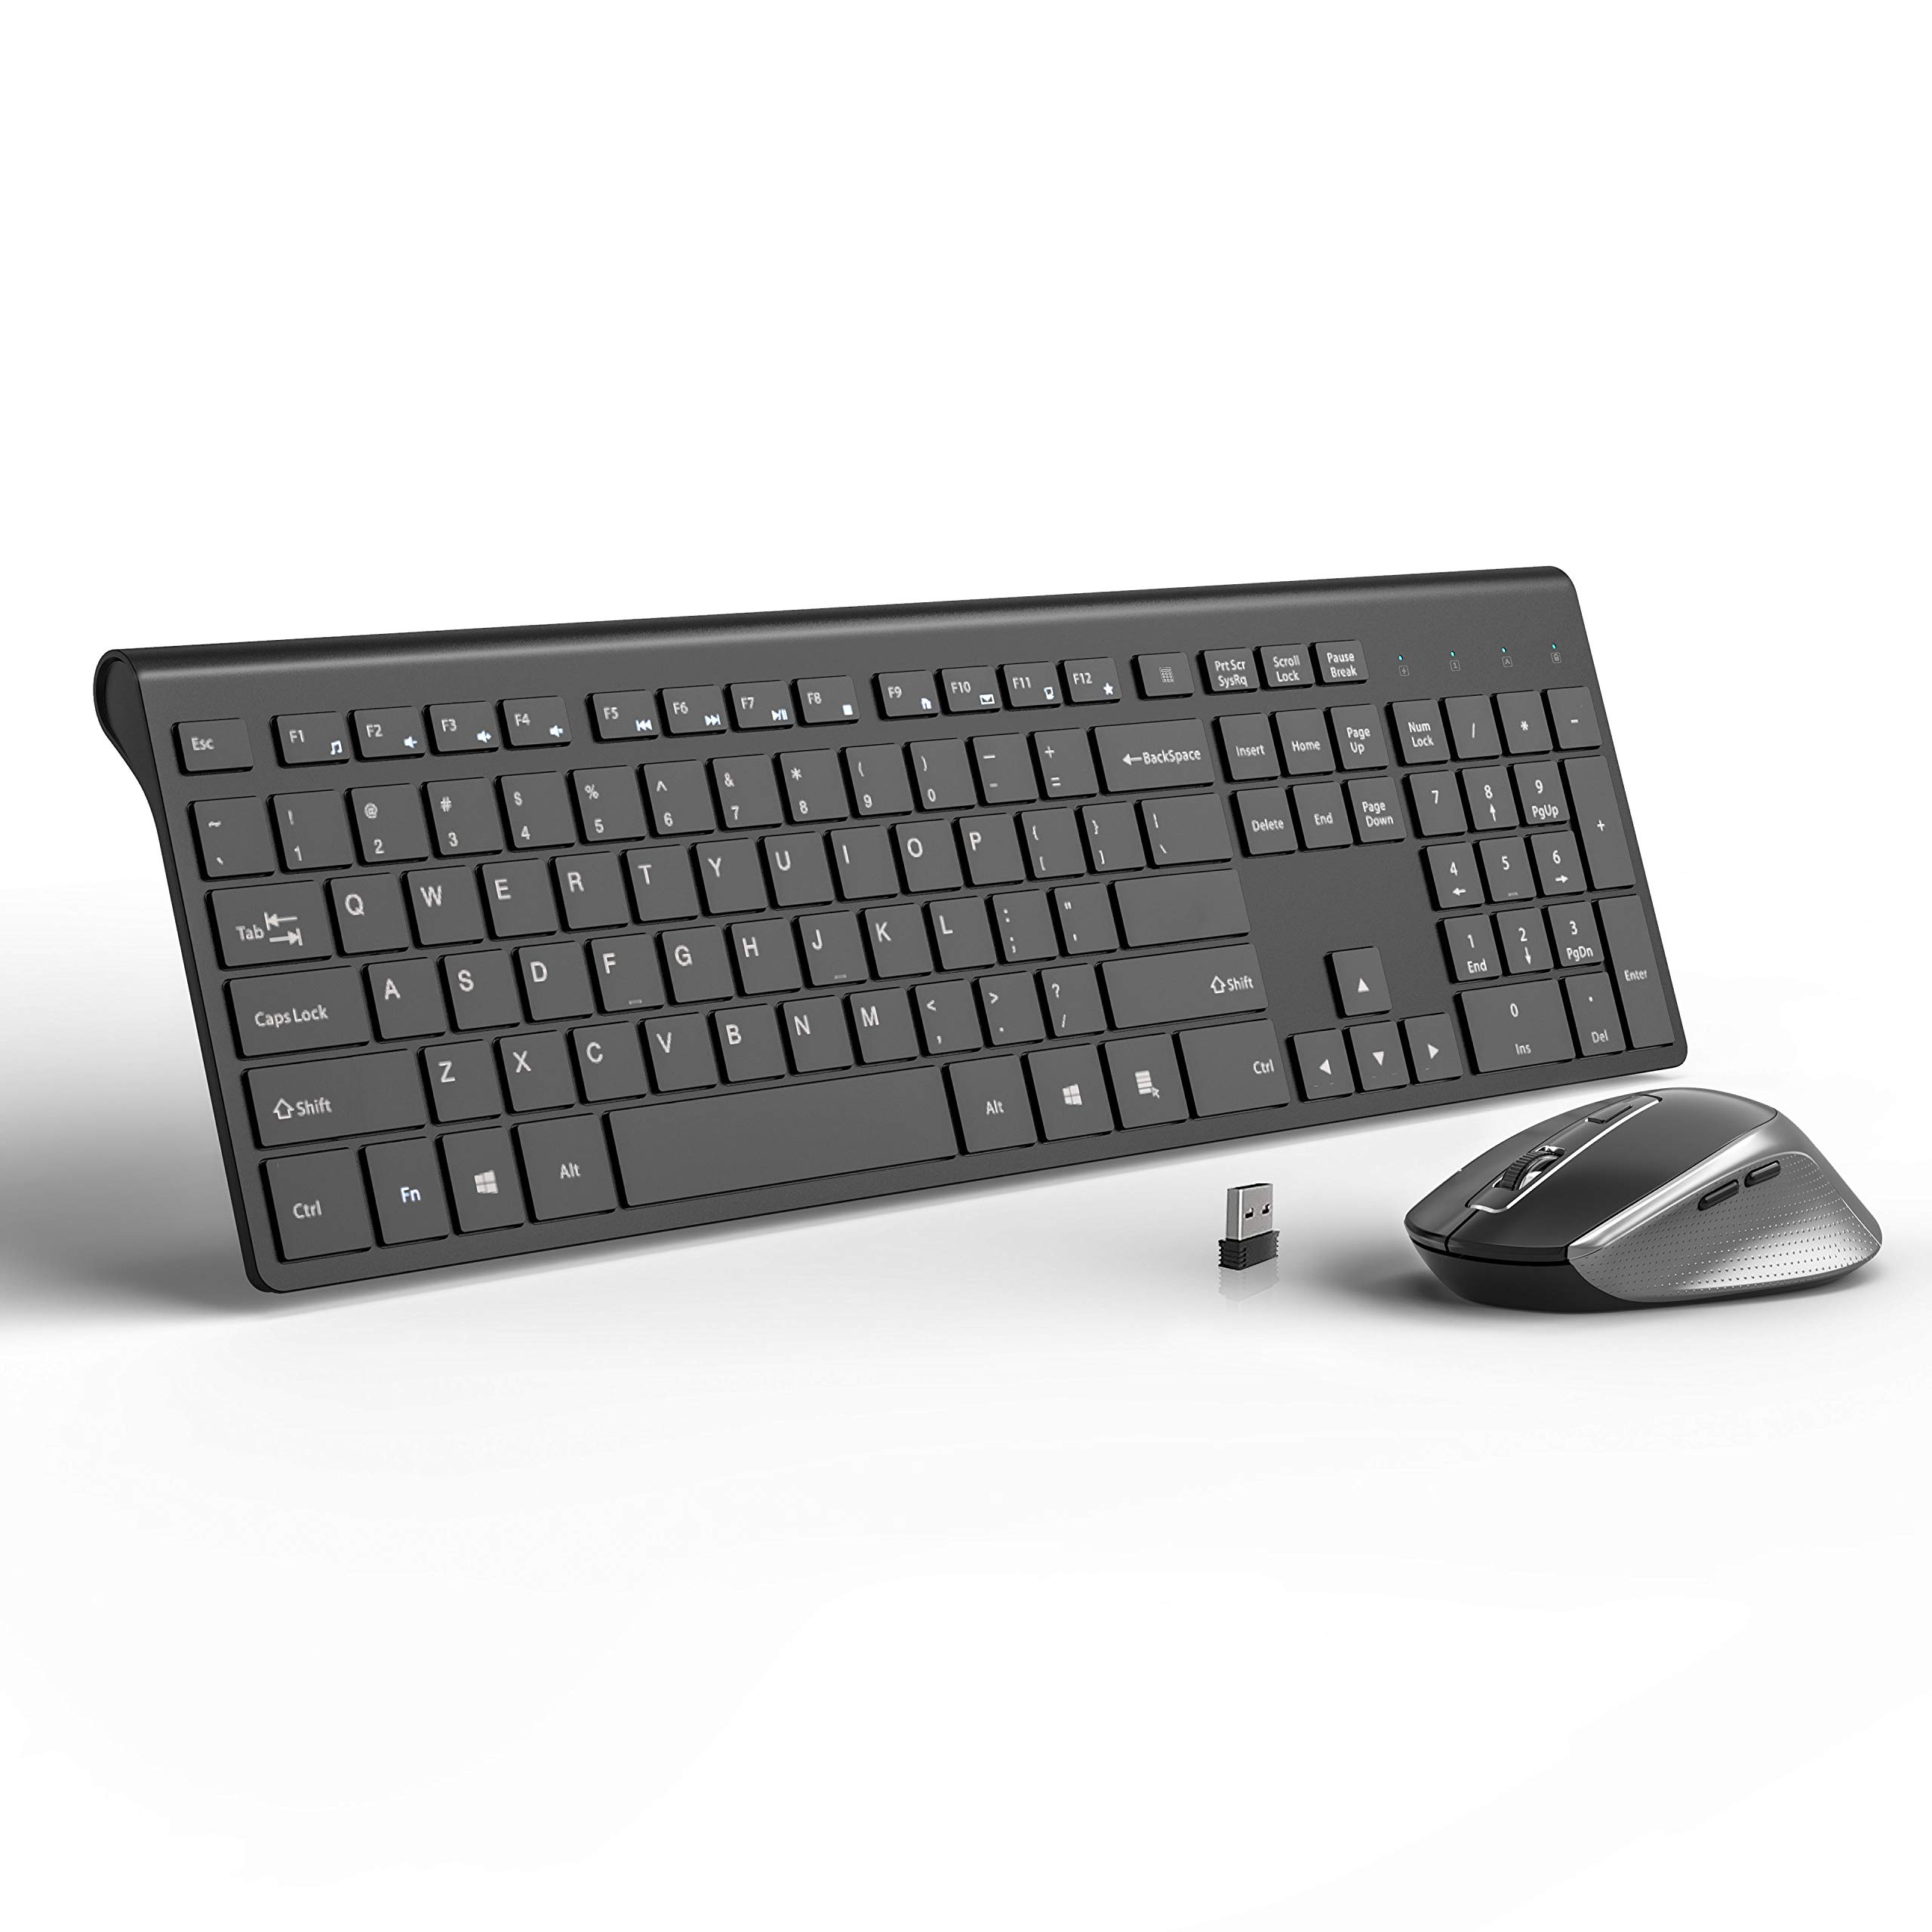 Wireless Keyboard and Mouse, J JOYACCESS 2.4G USB Ultra Slim Full Size Ergonomic Rechargeable Keyboard and Slient Cordless Mouse with Back/Forward Buttons for Mac/Windows/Laptop/Desktop - Black